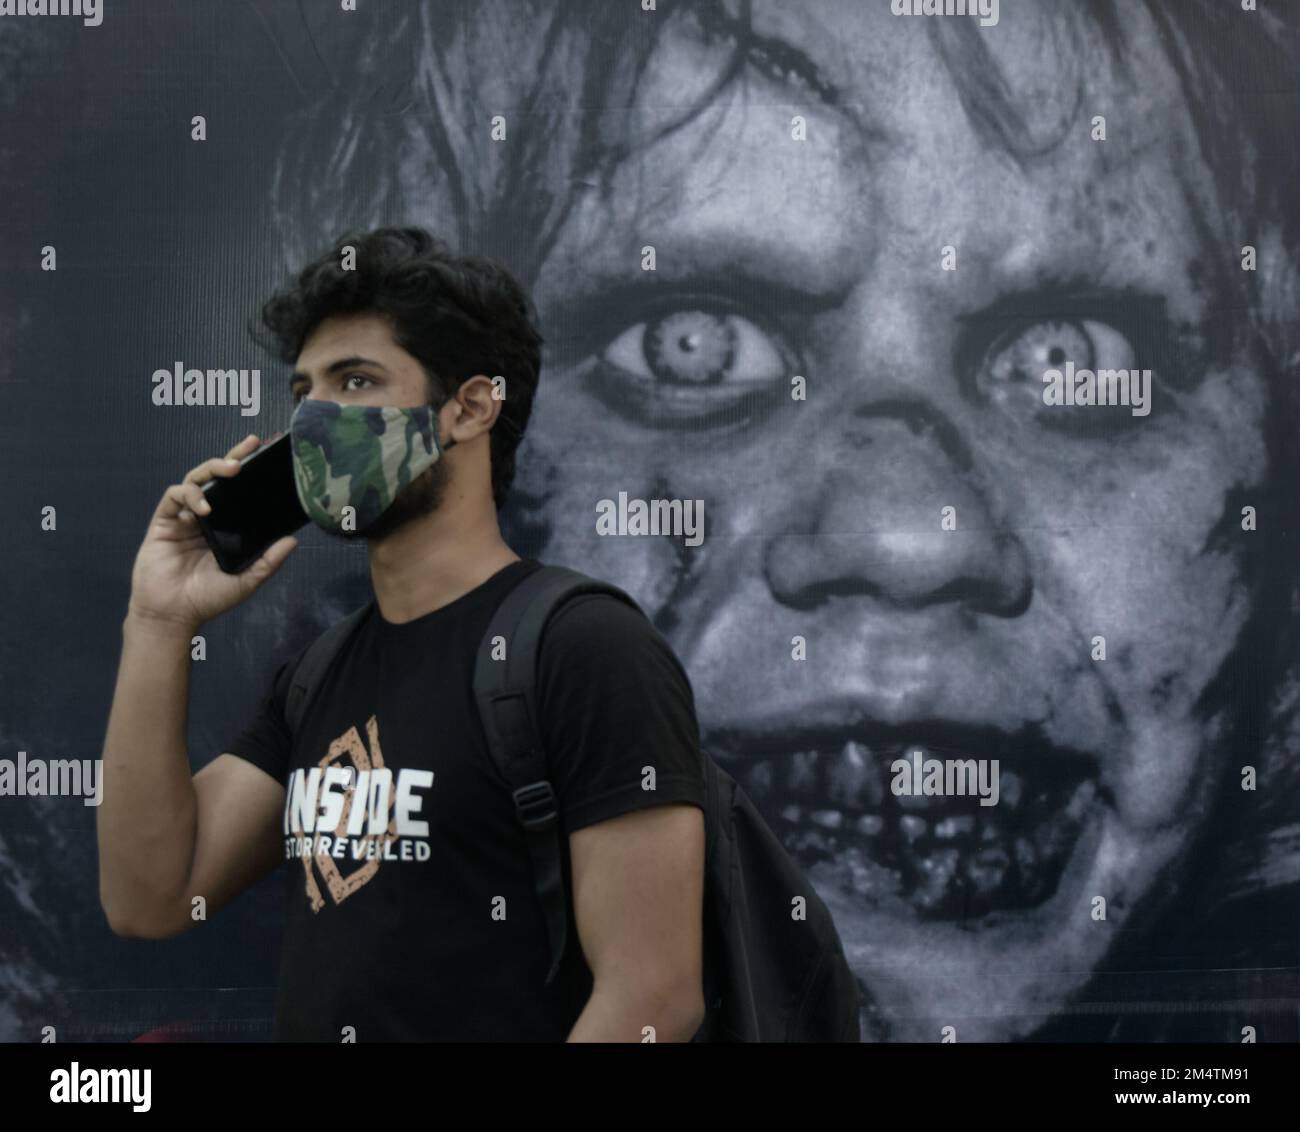 Man with a mask talking on phone infront of a scarry horror film poster. Unique, perfect timing photography. Stock Photo